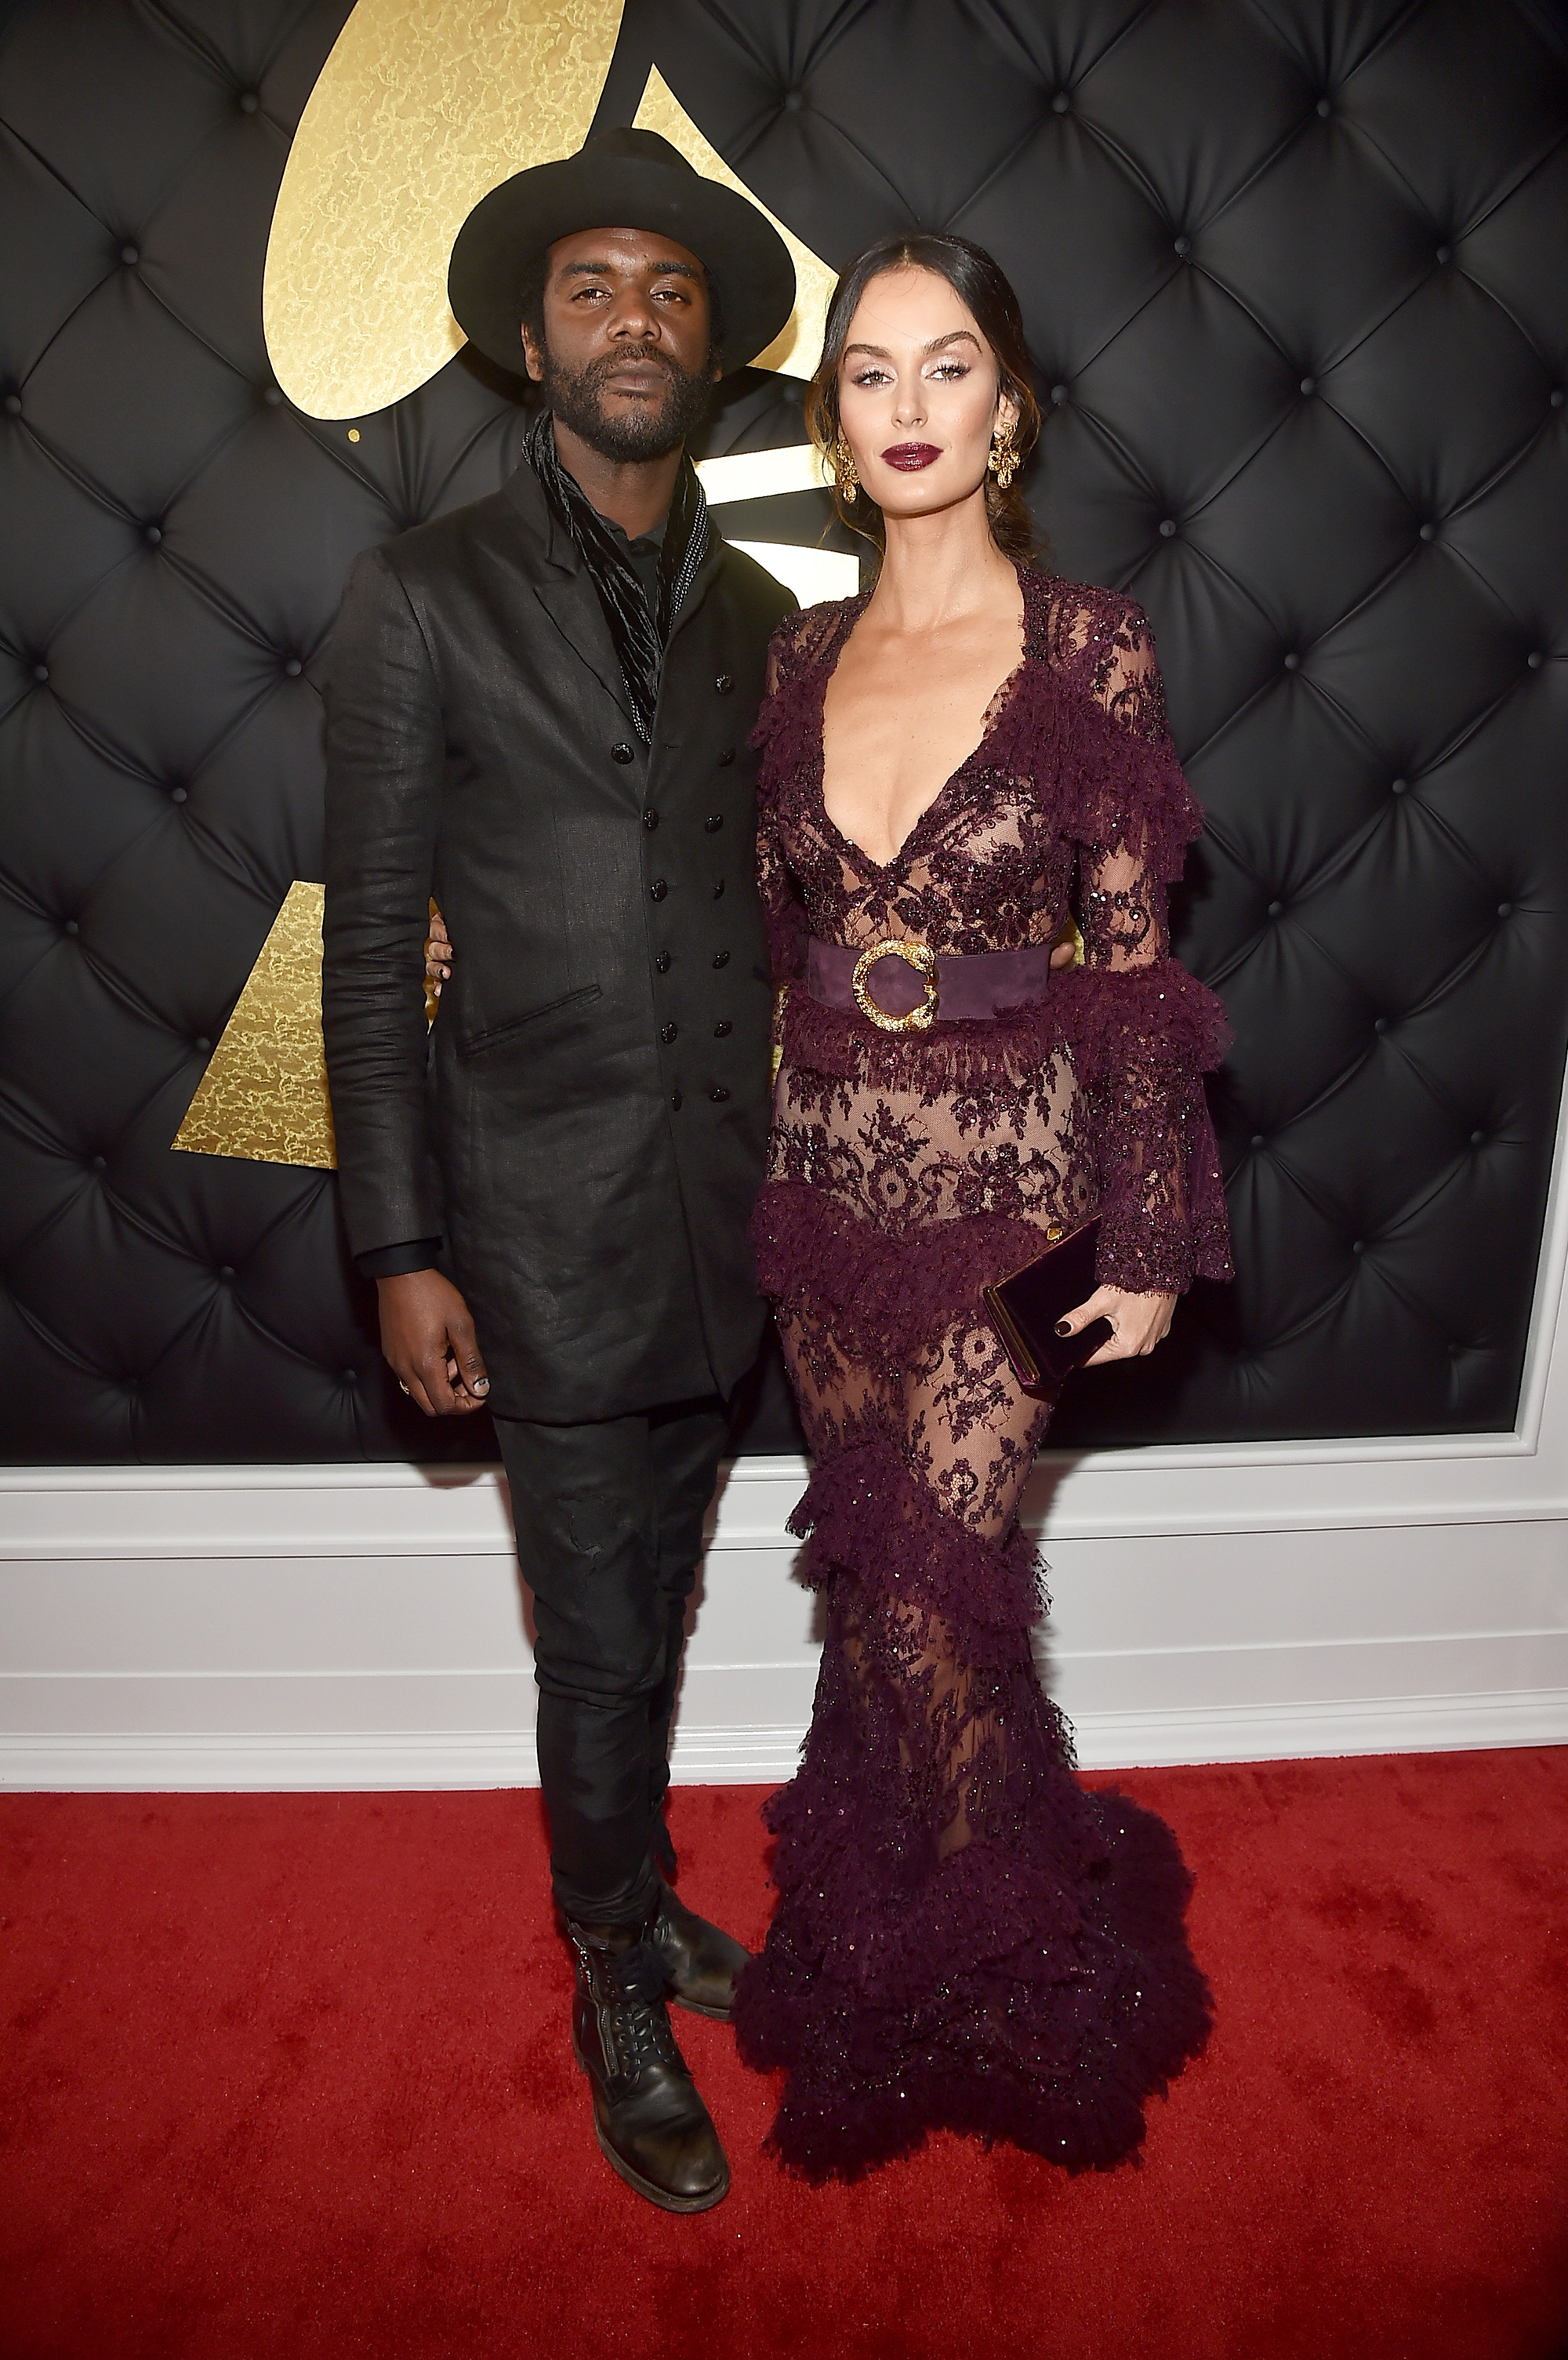 Gary Clark Jr. and Nicole Trunfio attend the 59th GRAMMY Awards at STAPLES Center, on Feb. 12, 2017 in Los Angeles.